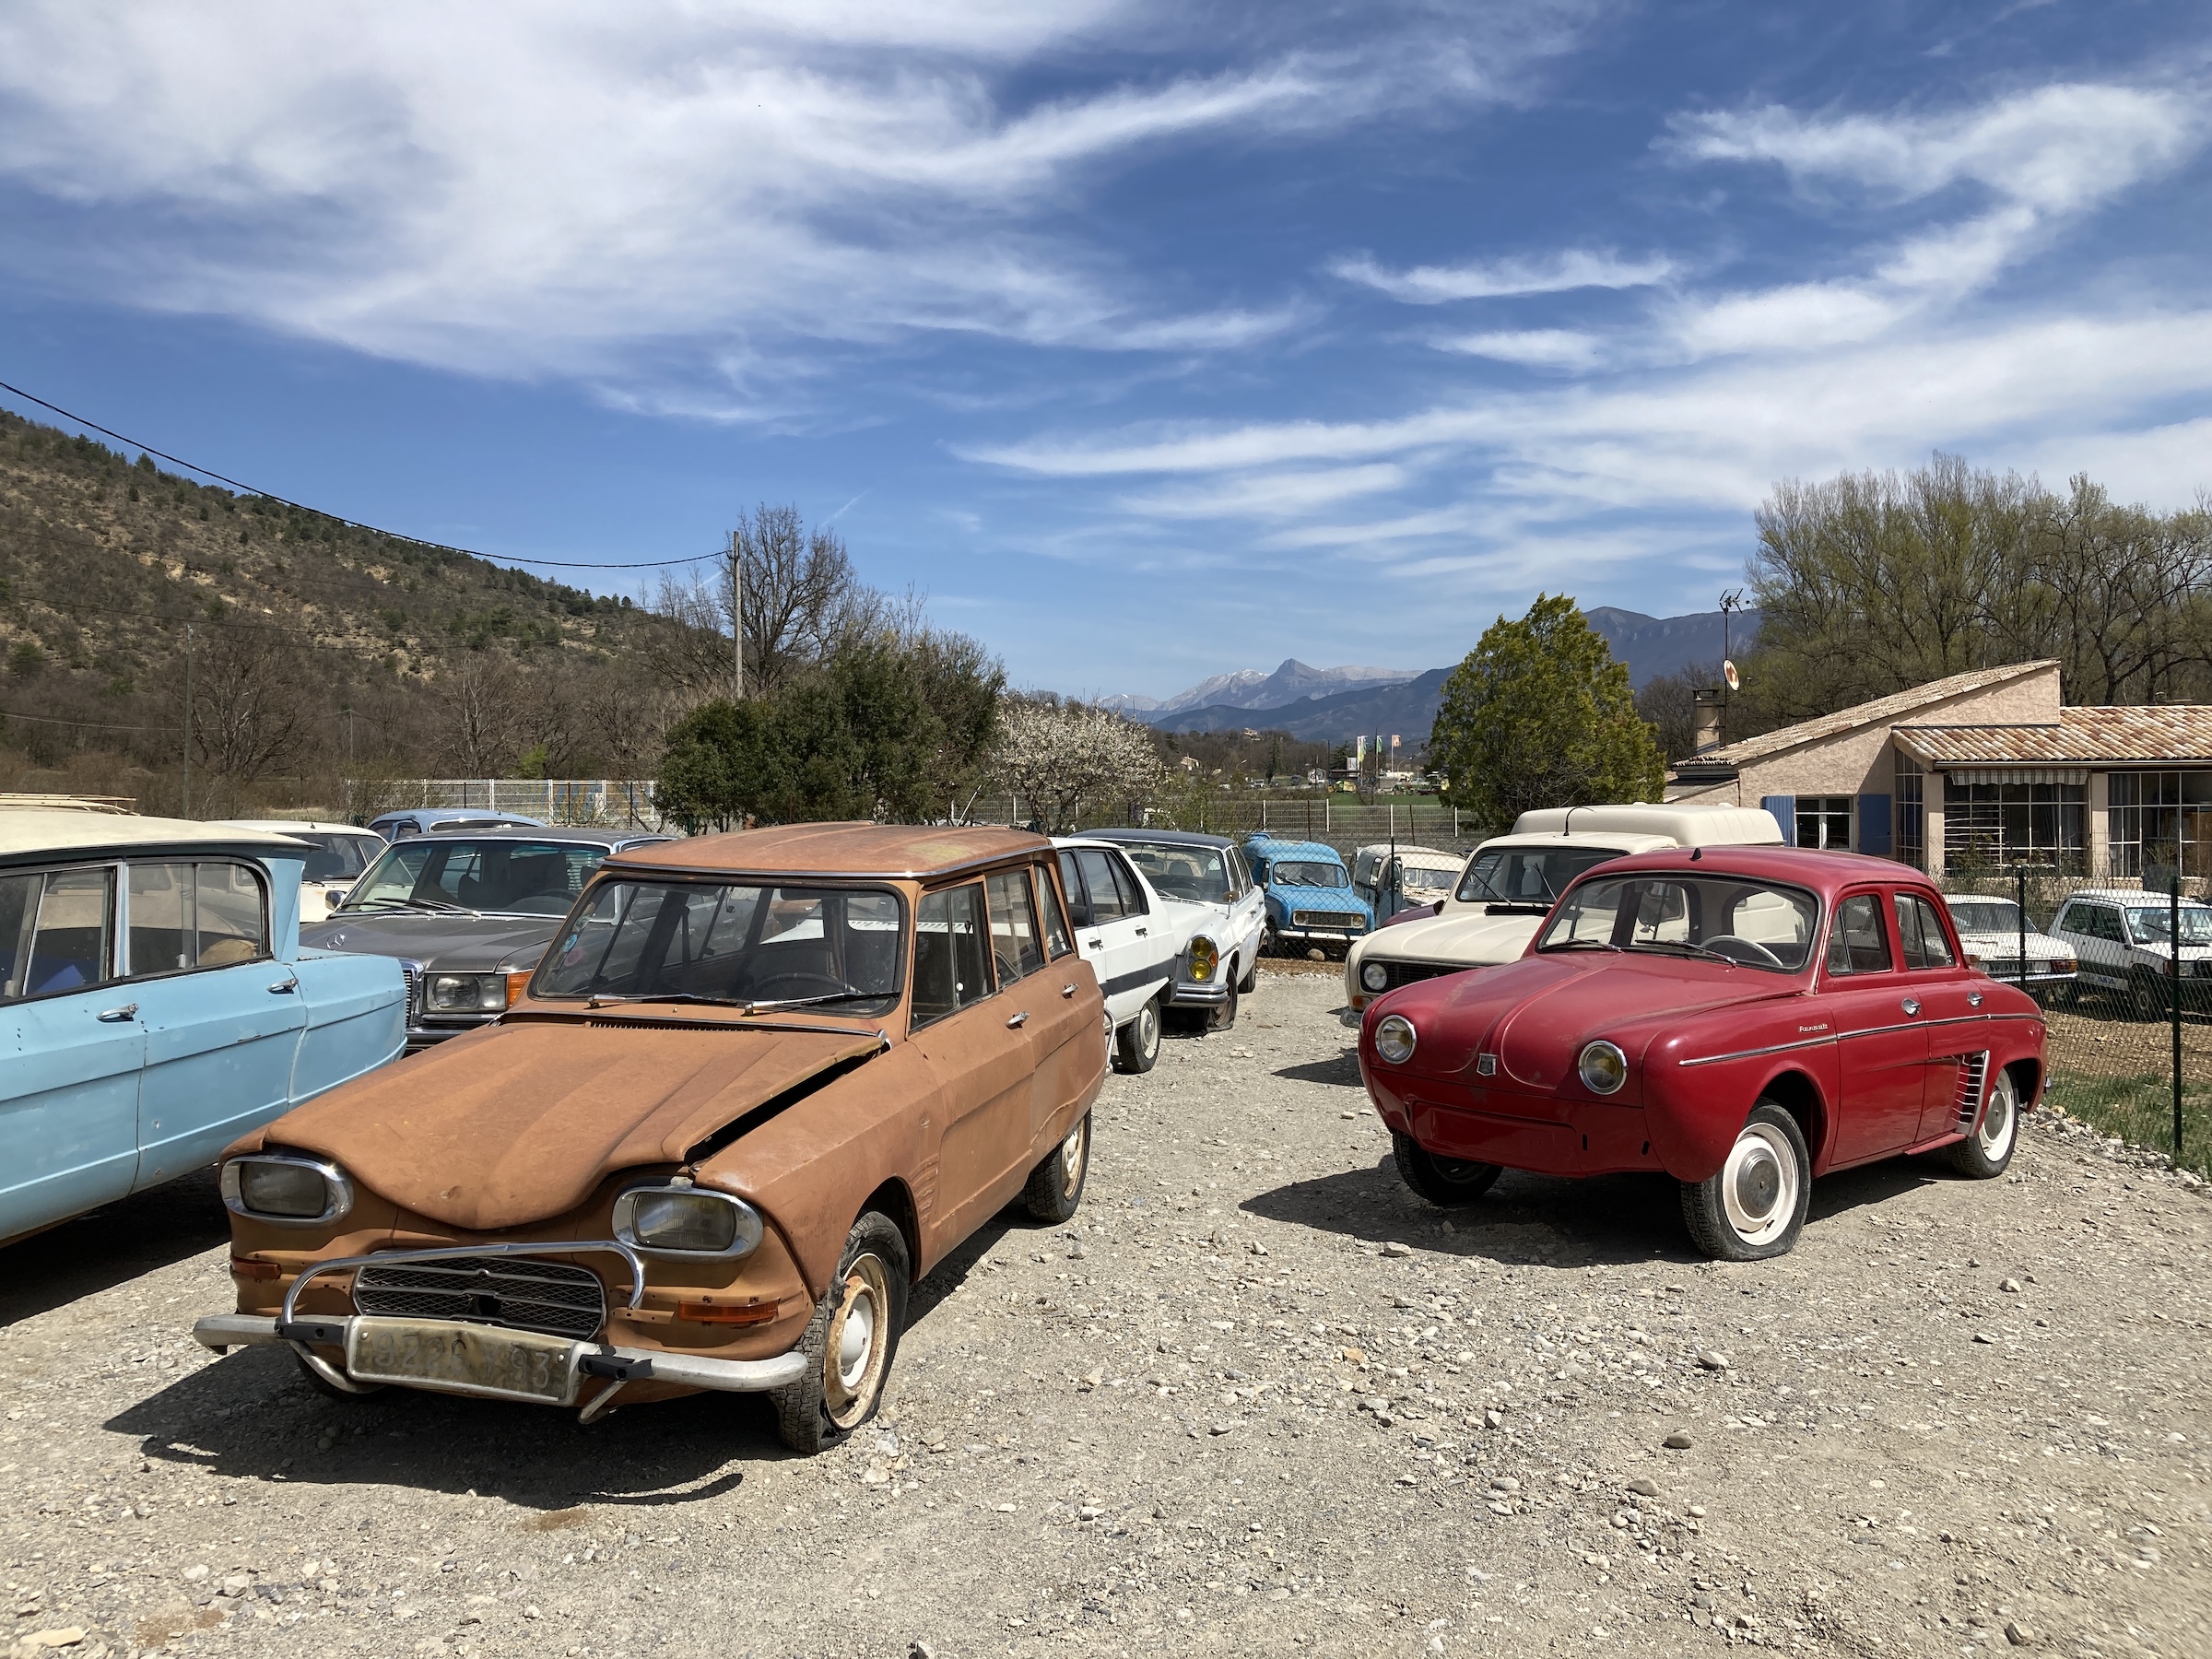 The run-down delights of a French roadside car lot